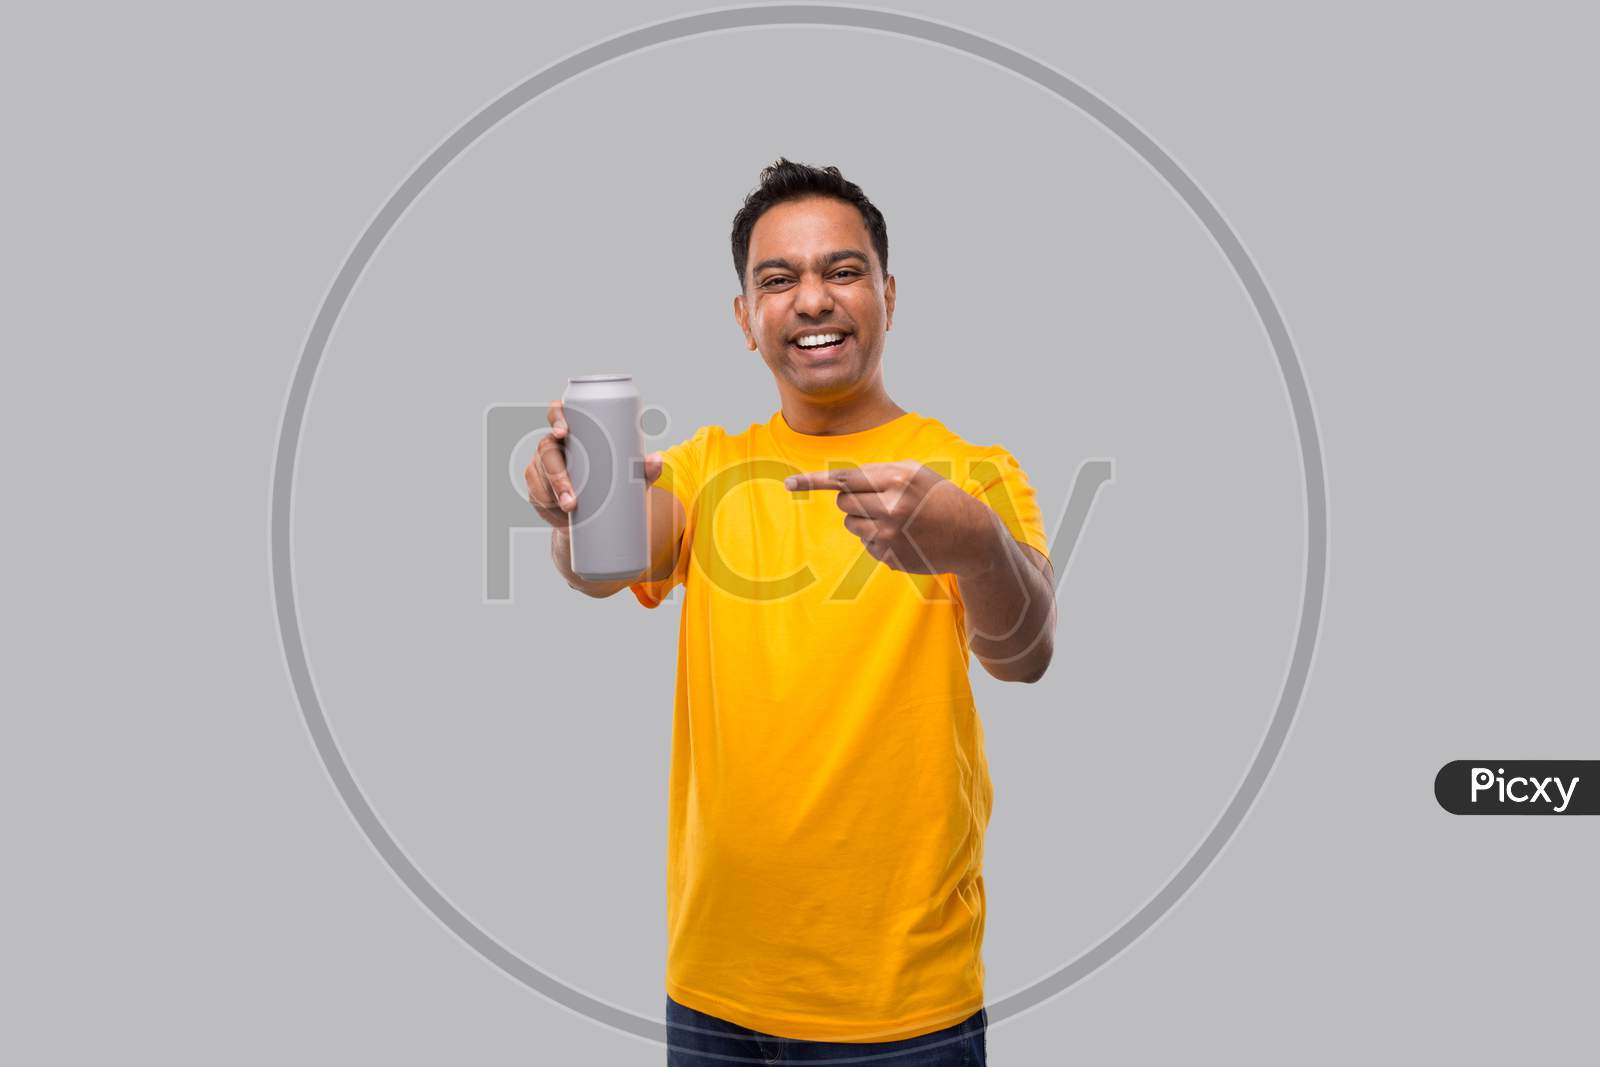 Indian Man Pointing At Tin Can Isolated. Drink